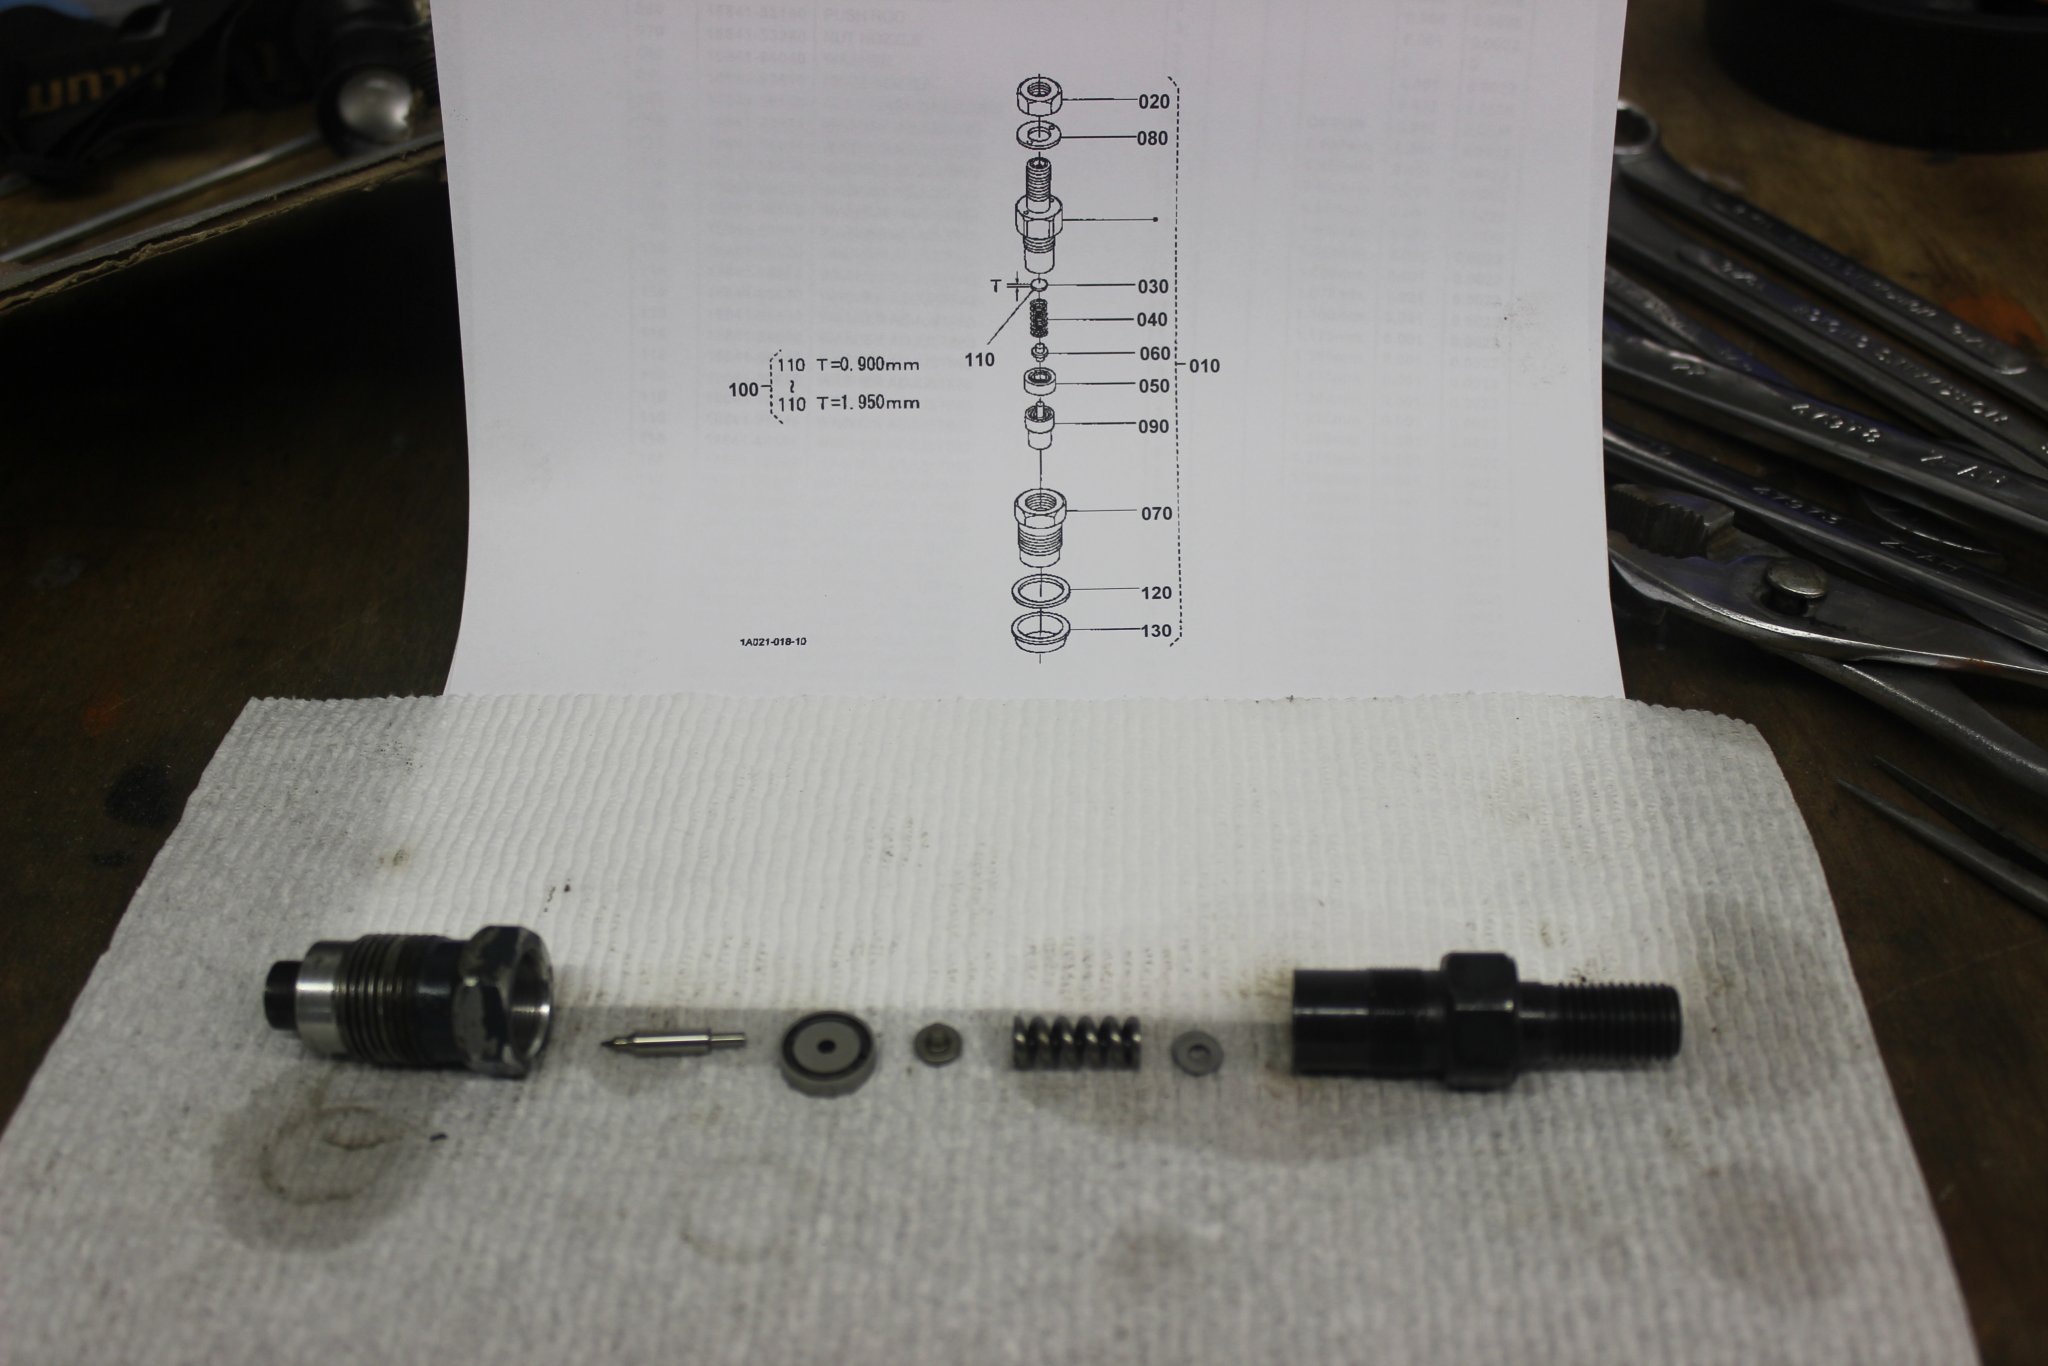 Injector - Disassembled.JPG